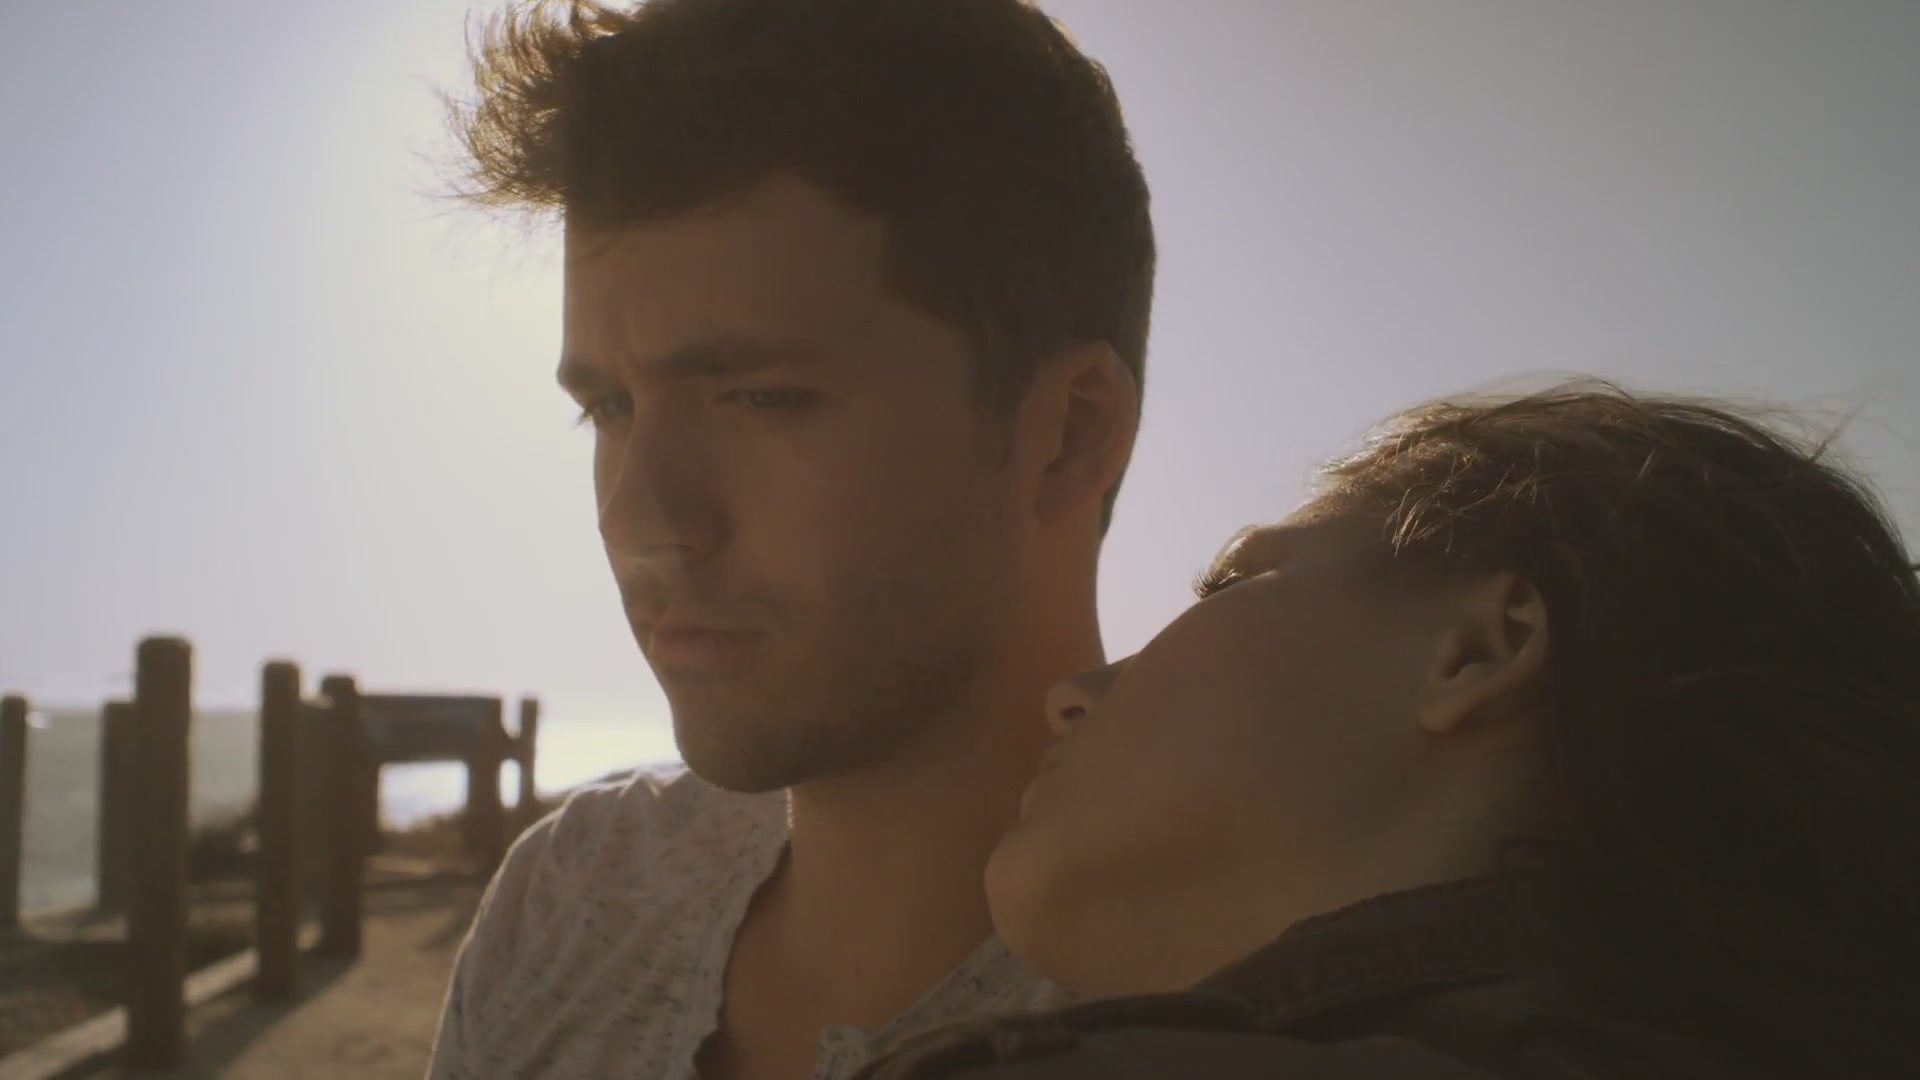 Stephen Lunsford in Music Video: Memories